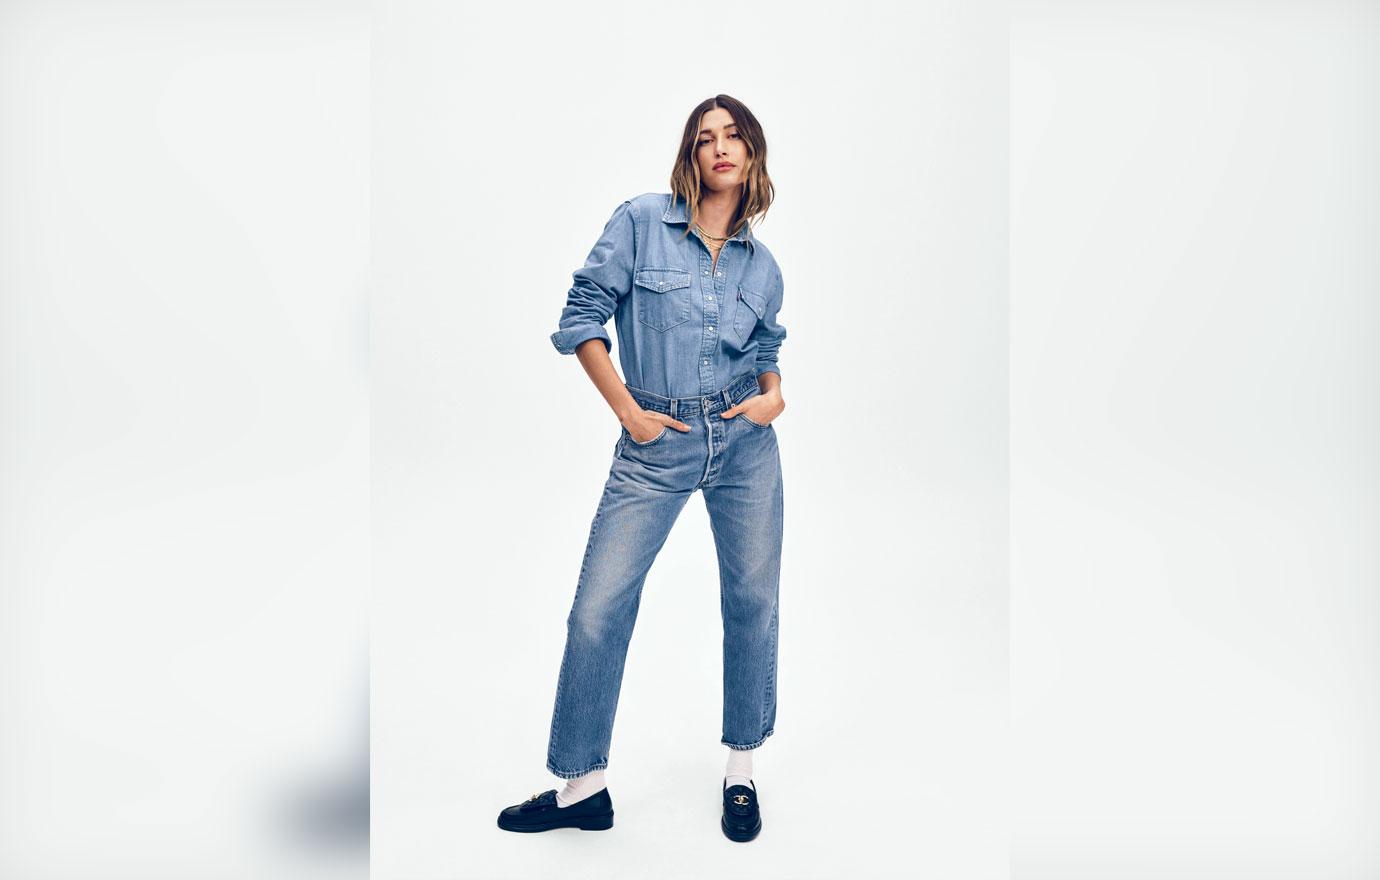 Hailey Bieber Models Levi's 501 Jeans For The Brand's 148th Birthday